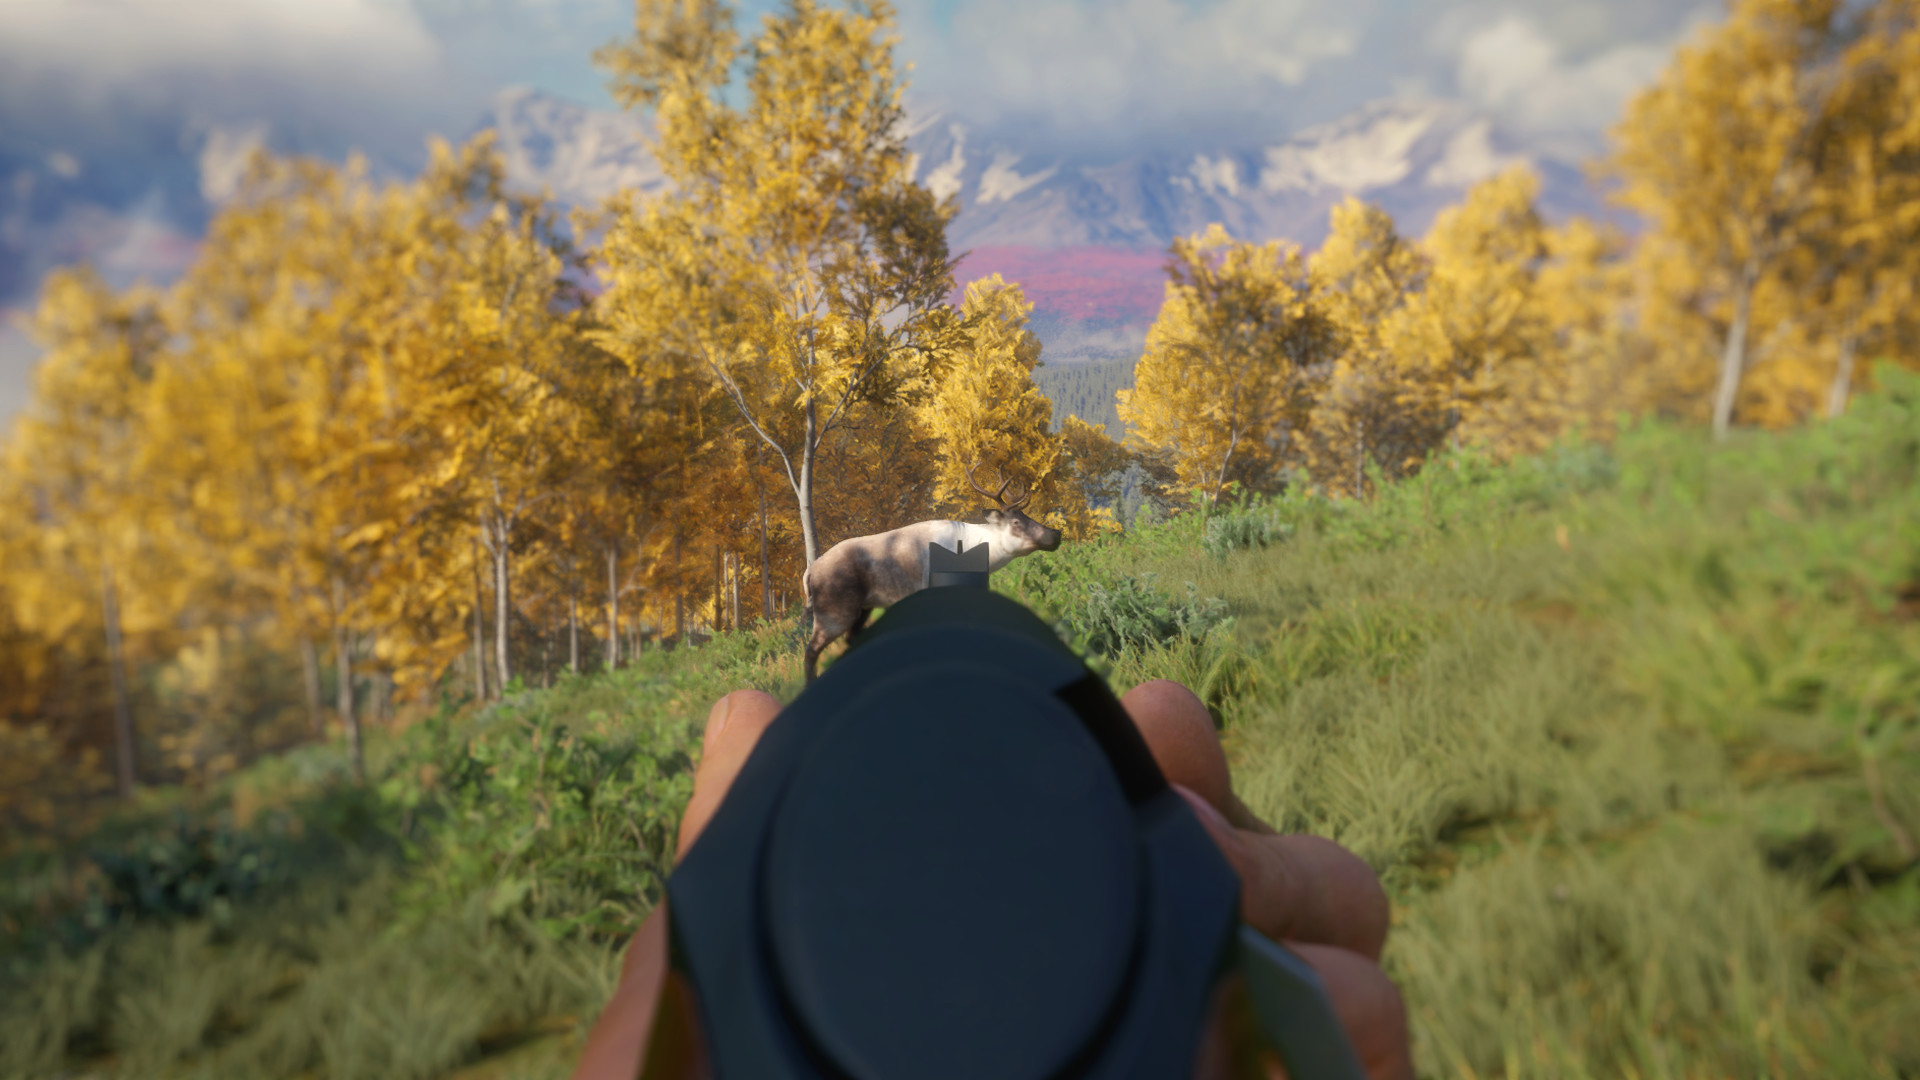 TheHunter: Call Of The Wild - Weapon Pack 3 DLC Steam CD Key